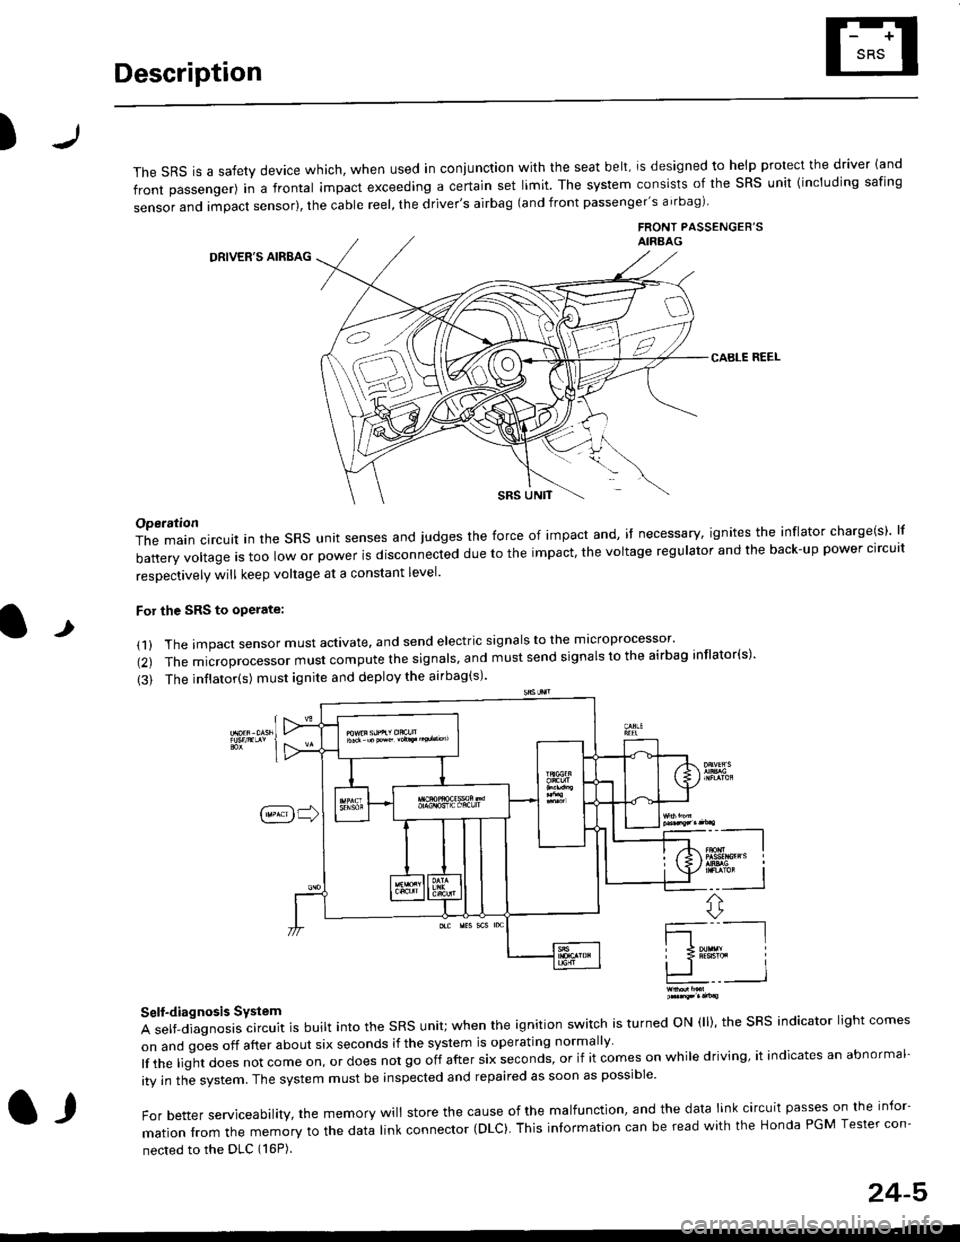 HONDA CIVIC 1998 6.G Workshop Manual Description
)
The sRS is a safety device which, when used in coniunction with the seat belt, is designed to help protect the driver land
front passenger) in a frontal impact exceeding a certain set li